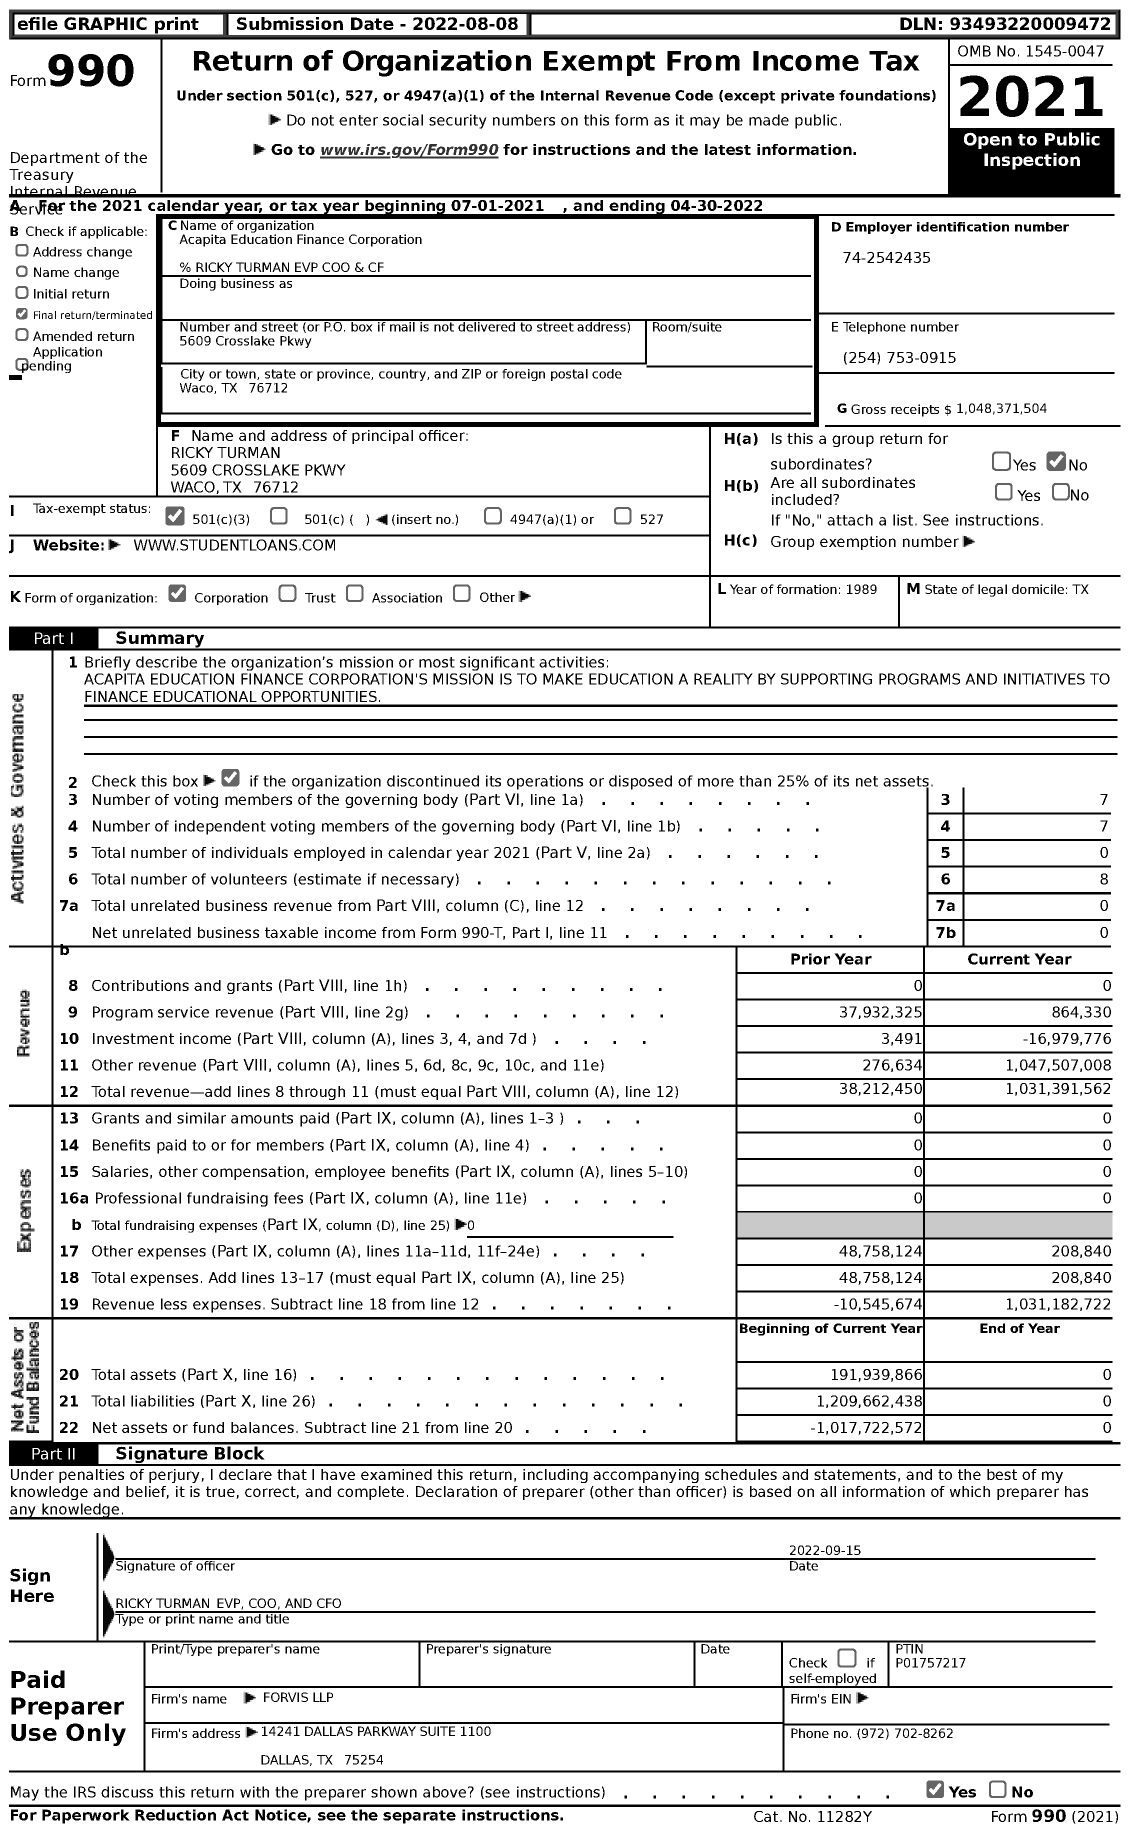 Image of first page of 2021 Form 990 for Acapita Education Finance Corporation